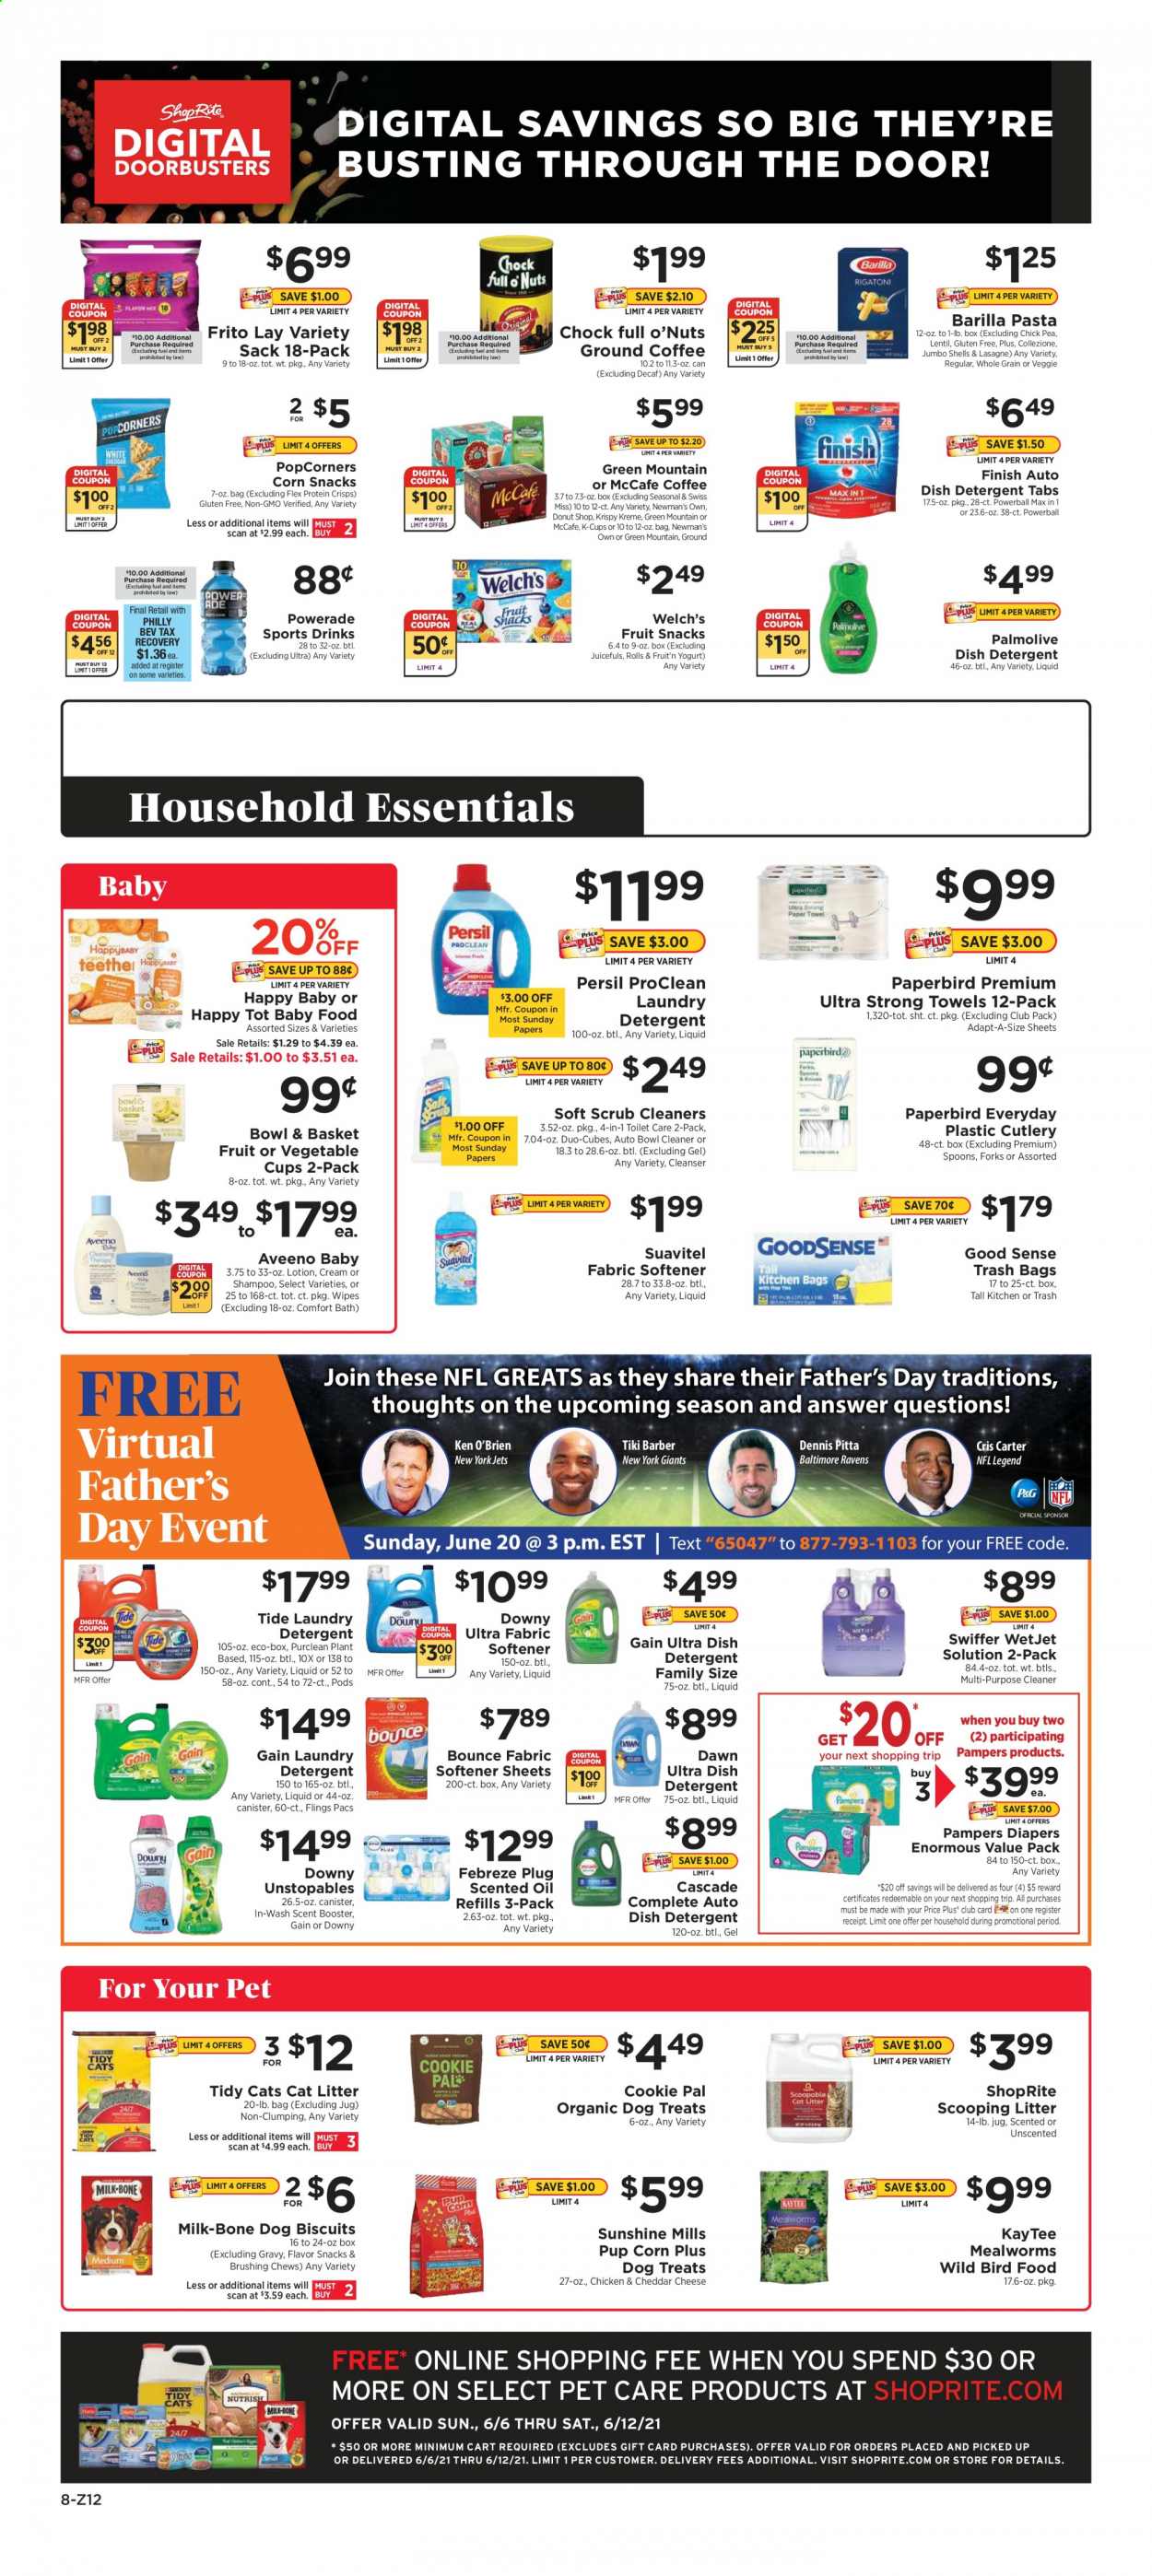 thumbnail - ShopRite Flyer - 06/06/2021 - 06/12/2021 - Sales products - Bowl & Basket, corn, Welch's, pasta, Barilla, cheese, yoghurt, Swiss Miss, milk, Sunshine, chewing gum, fruit snack, popcorn, oil, Powerade, coffee capsules, McCafe, K-Cups, Green Mountain, wipes, Pampers, nappies, Aveeno, detergent, Febreze, Gain, cleaner, Cascade, Tide, Unstopables, Persil, fabric softener, laundry detergent, Bounce, Downy Laundry, shampoo, Palmolive, cleanser, body lotion, trash bags, WetJet, spoon, disposable cutlery, scented oil, cat litter, Kaytee, animal food, animal treats, bird food, dog food, dog biscuits, mealworms. Page 10.